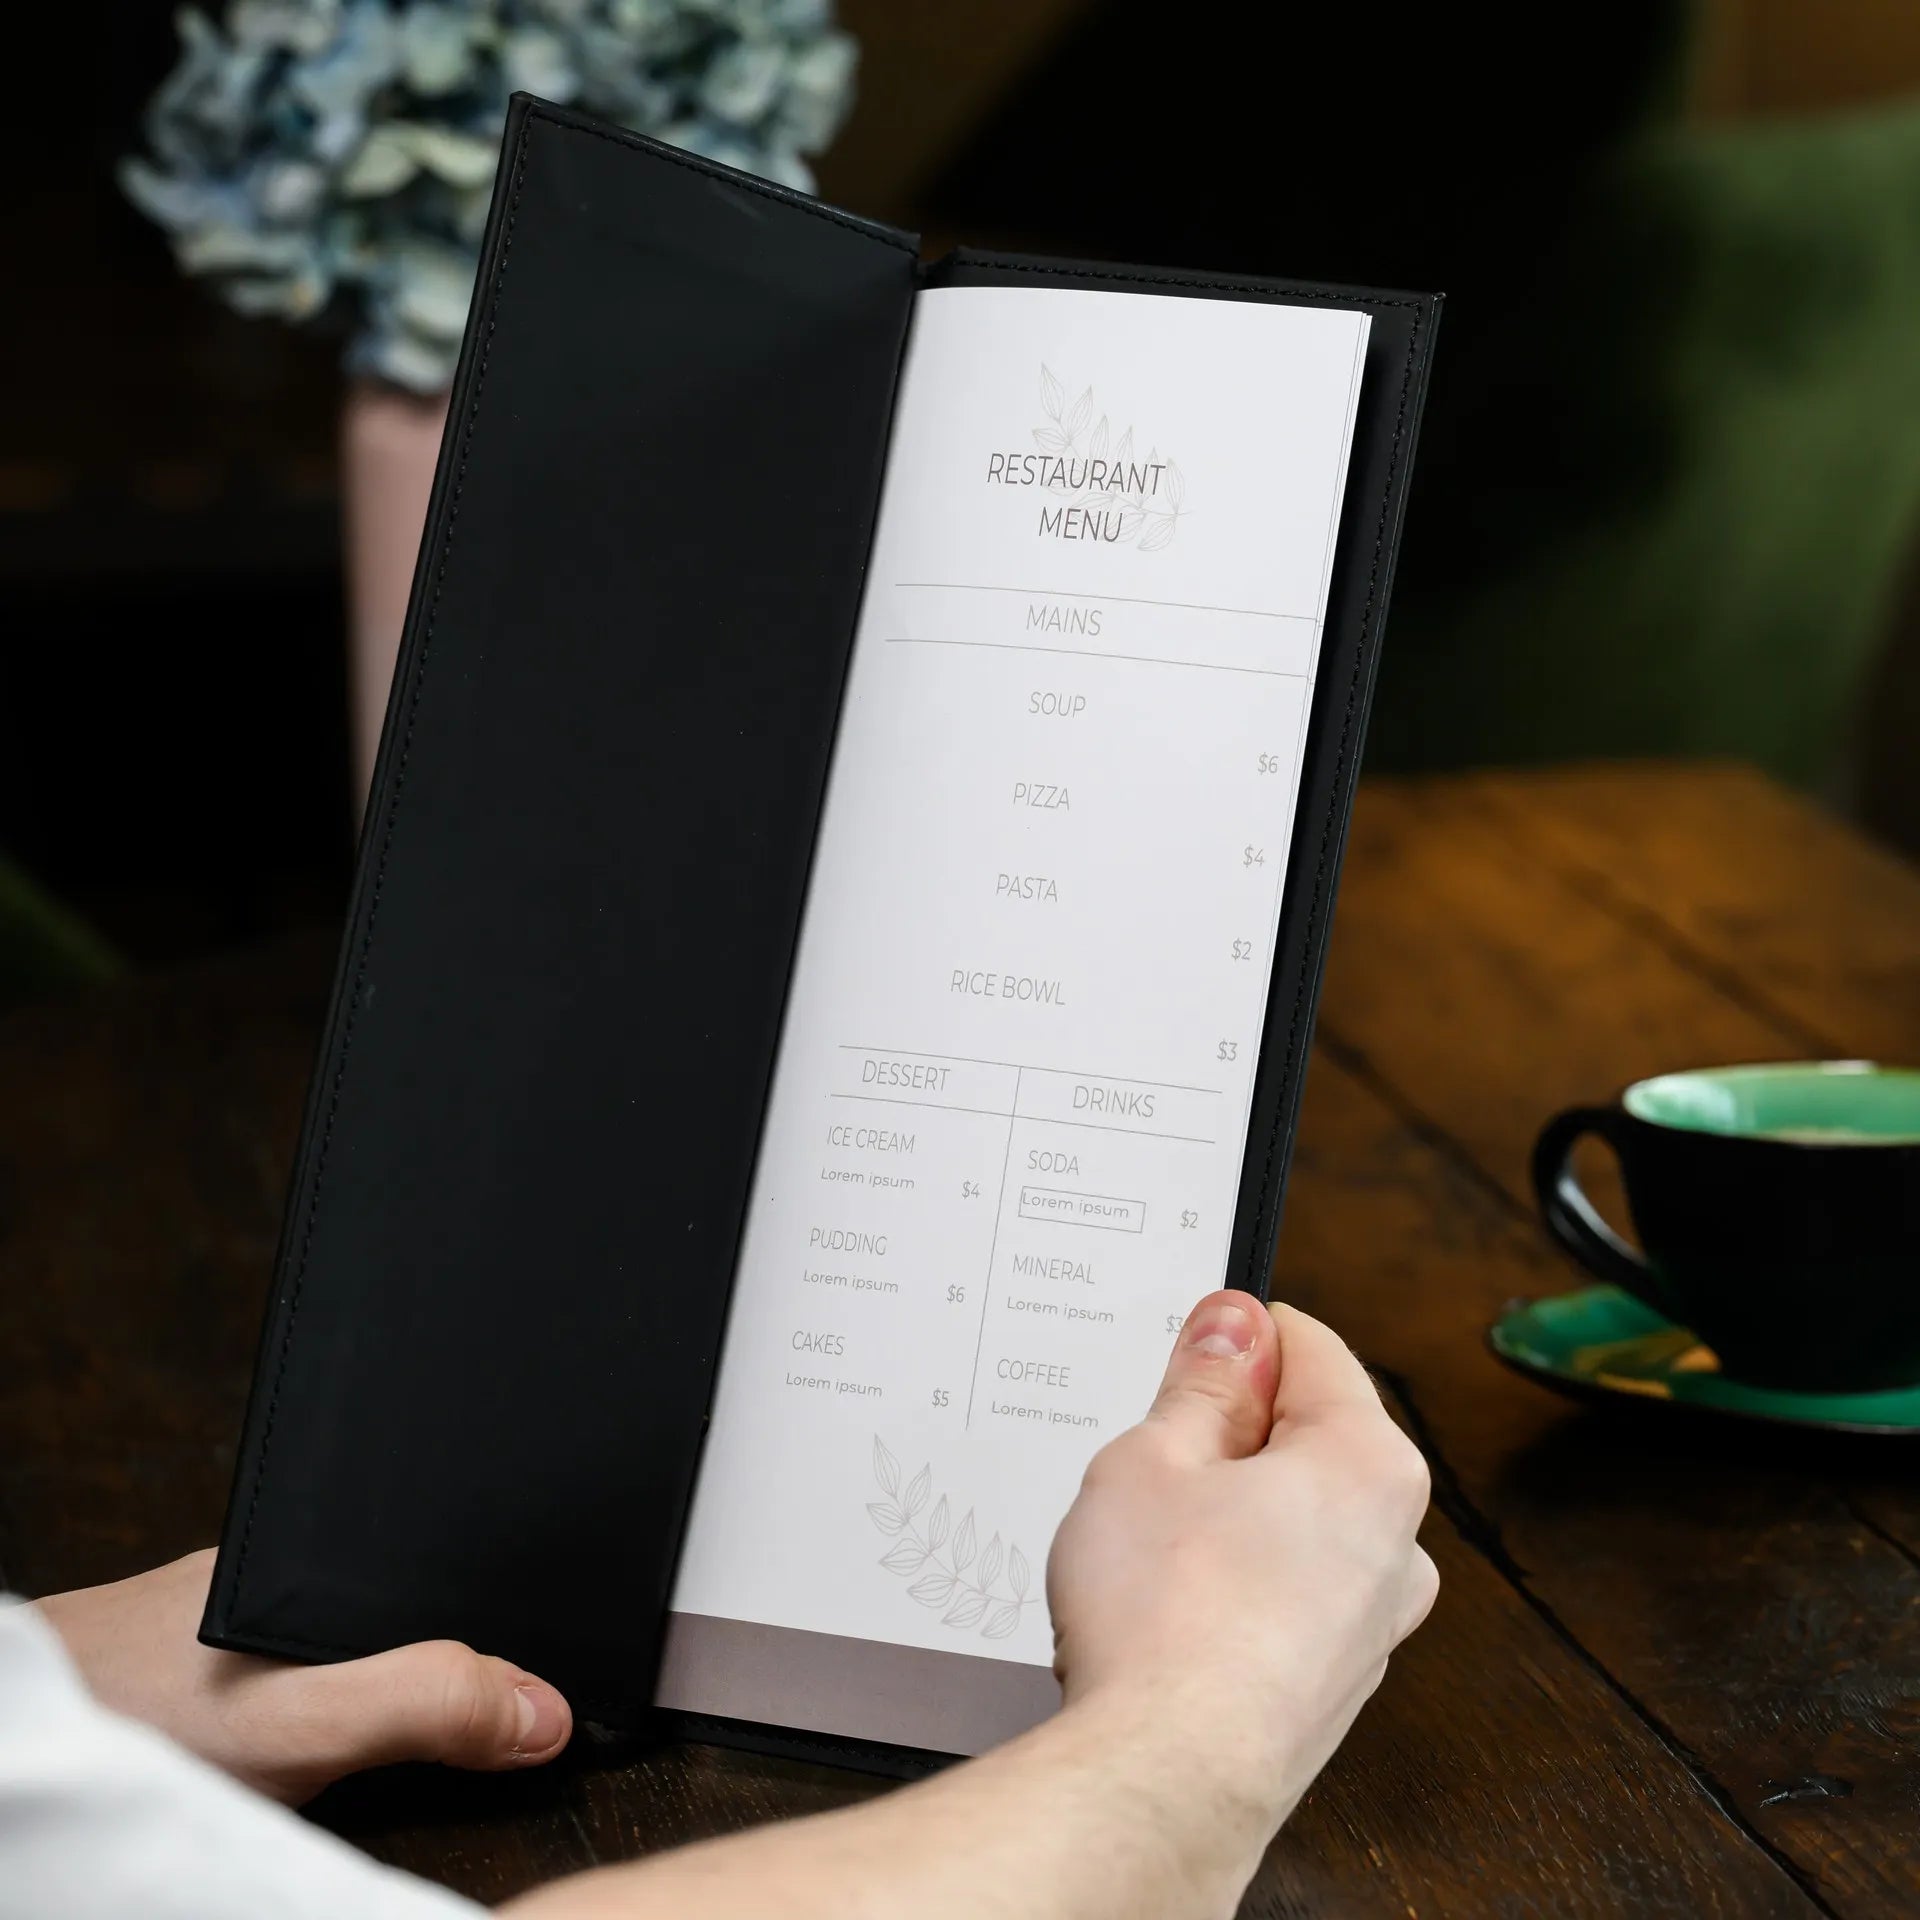 Secure Menu Folder with Fixing by Screws and Plank, ensuring menus remain intact and organized, providing a reliable solution for menu presentation in your restaurant.